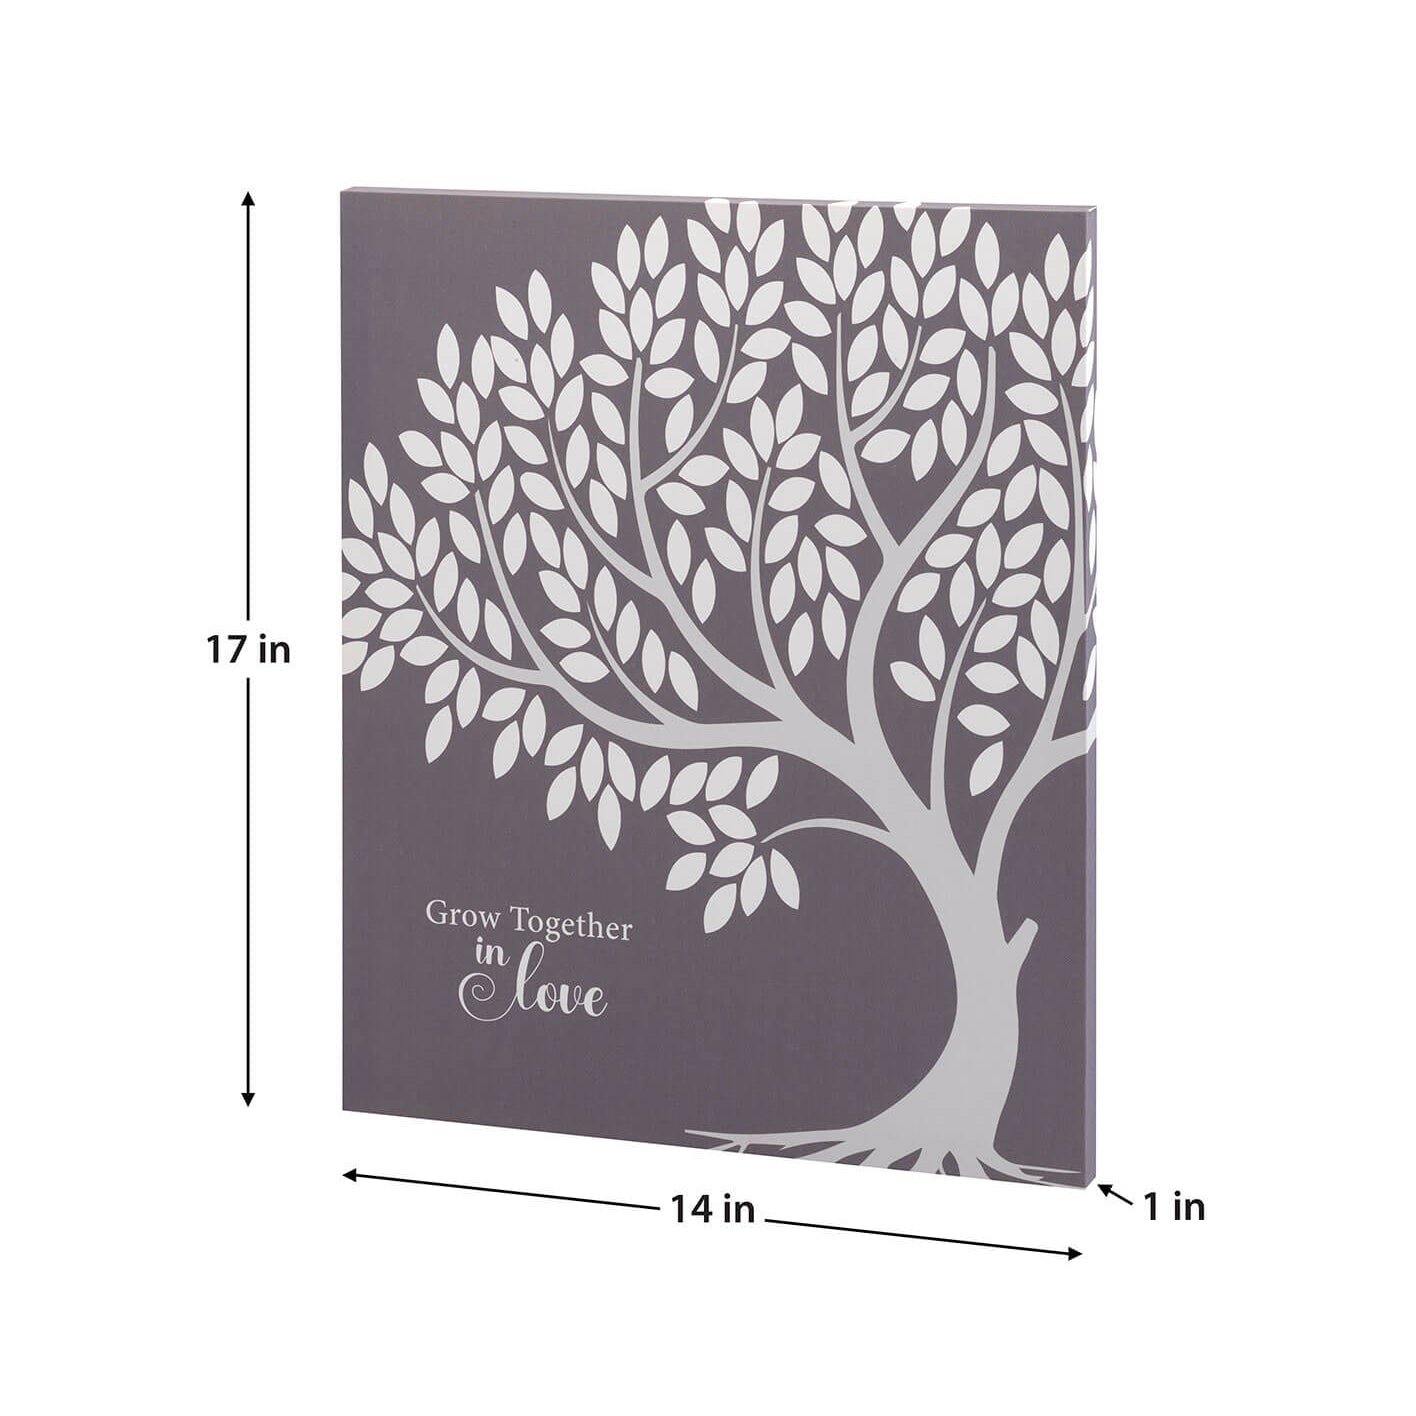 WEDDING TREE GUEST BOOK | Bridal Gift - Wedding Accessories - Alternative Signing Tree in Black - Minter and Richter Designs